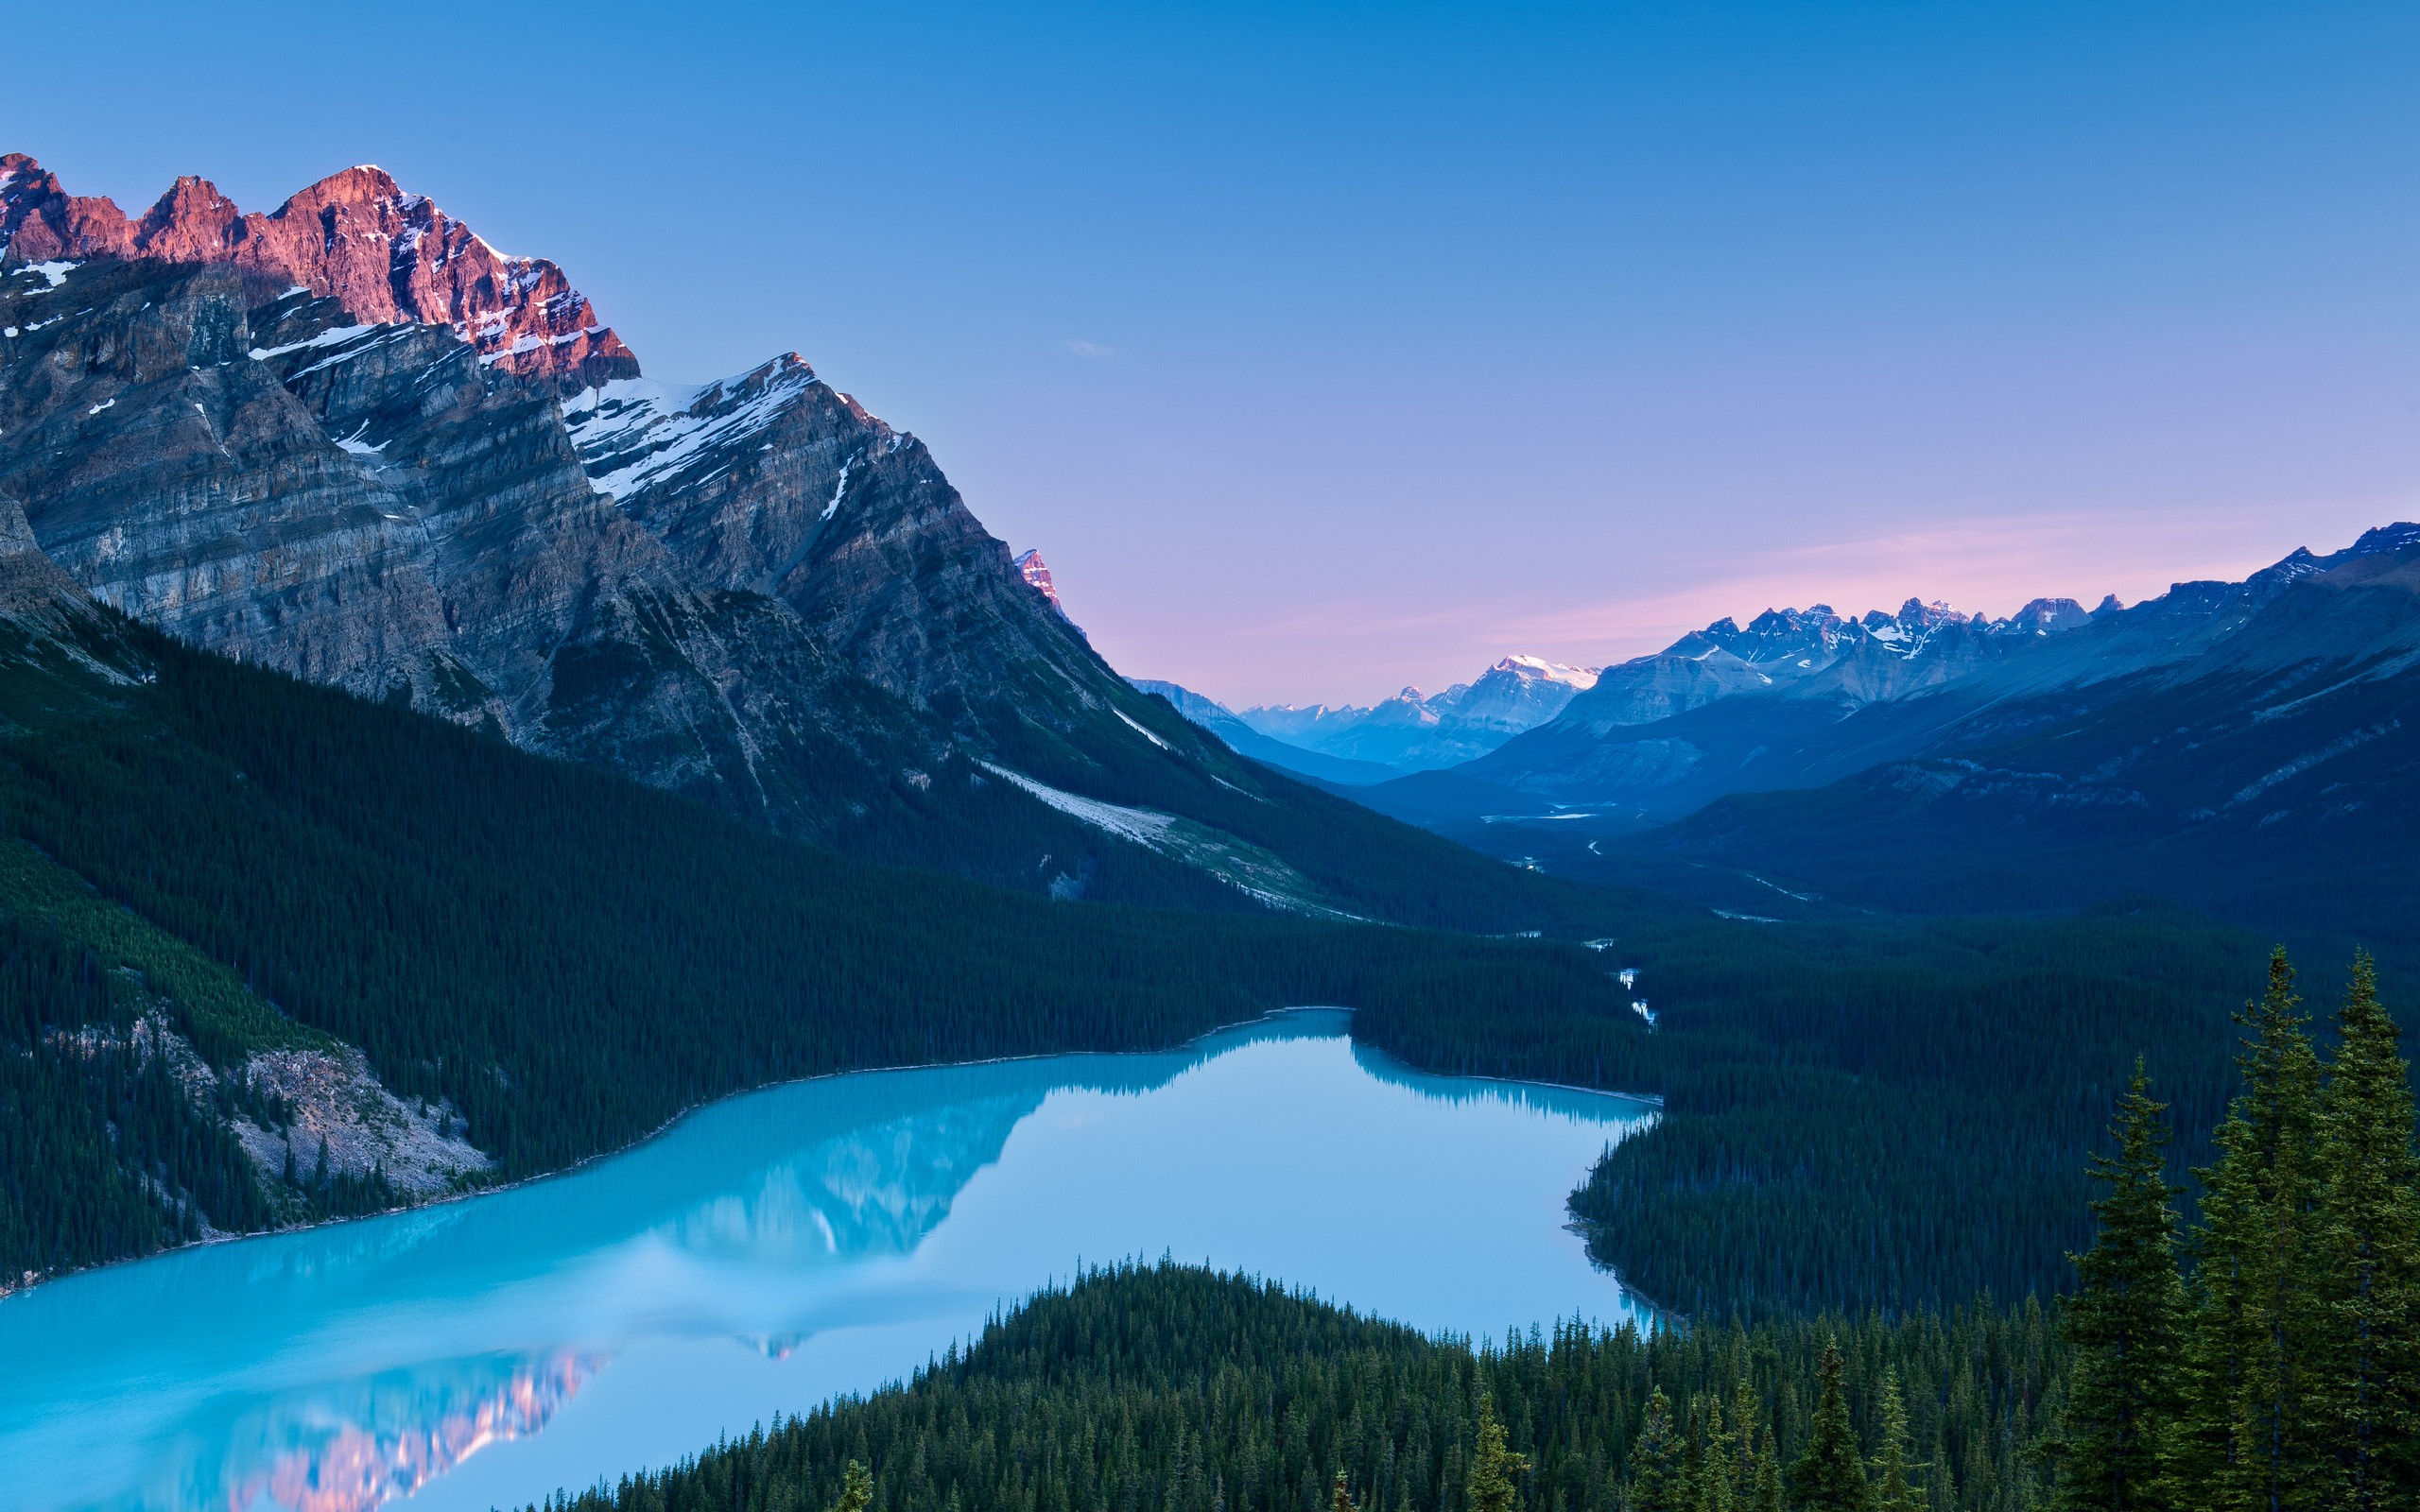 General 2560x1600 landscape Canada mountains nature lake forest Banff National Park Peyto Lake